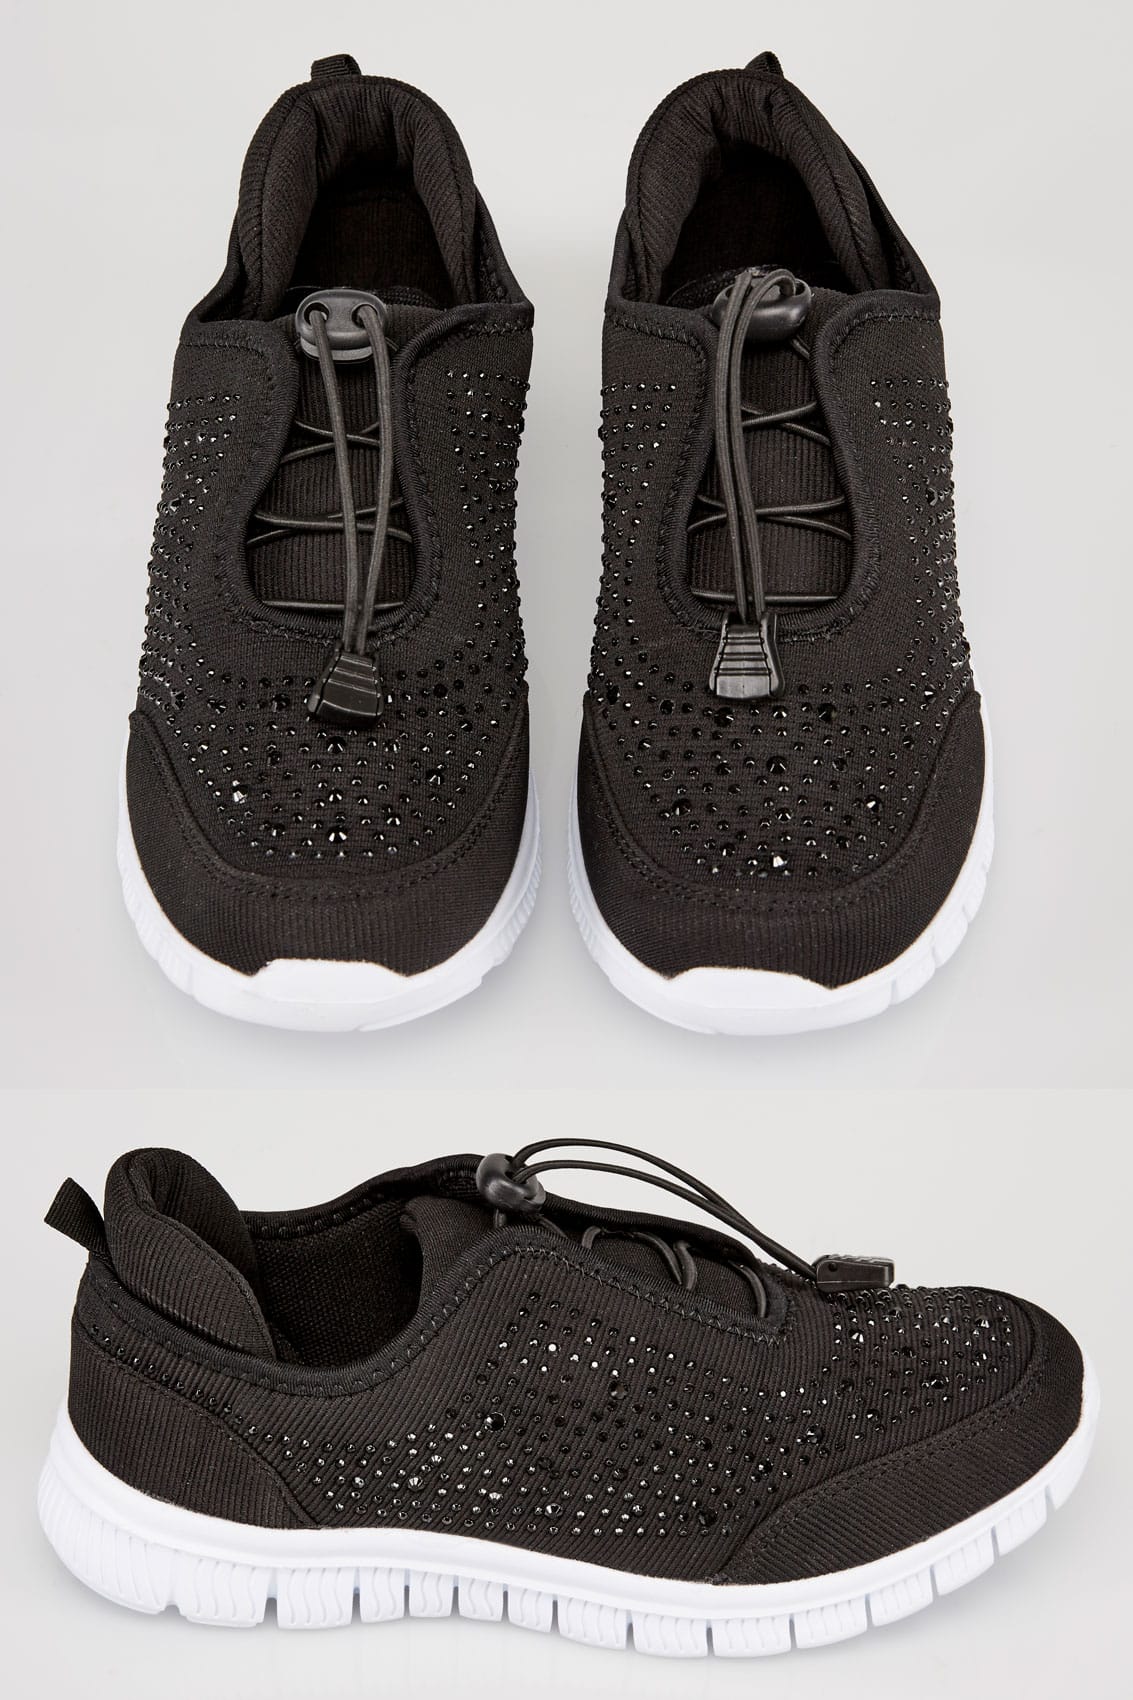 Black Embellished Trainers In EEE Fit1133 x 1700